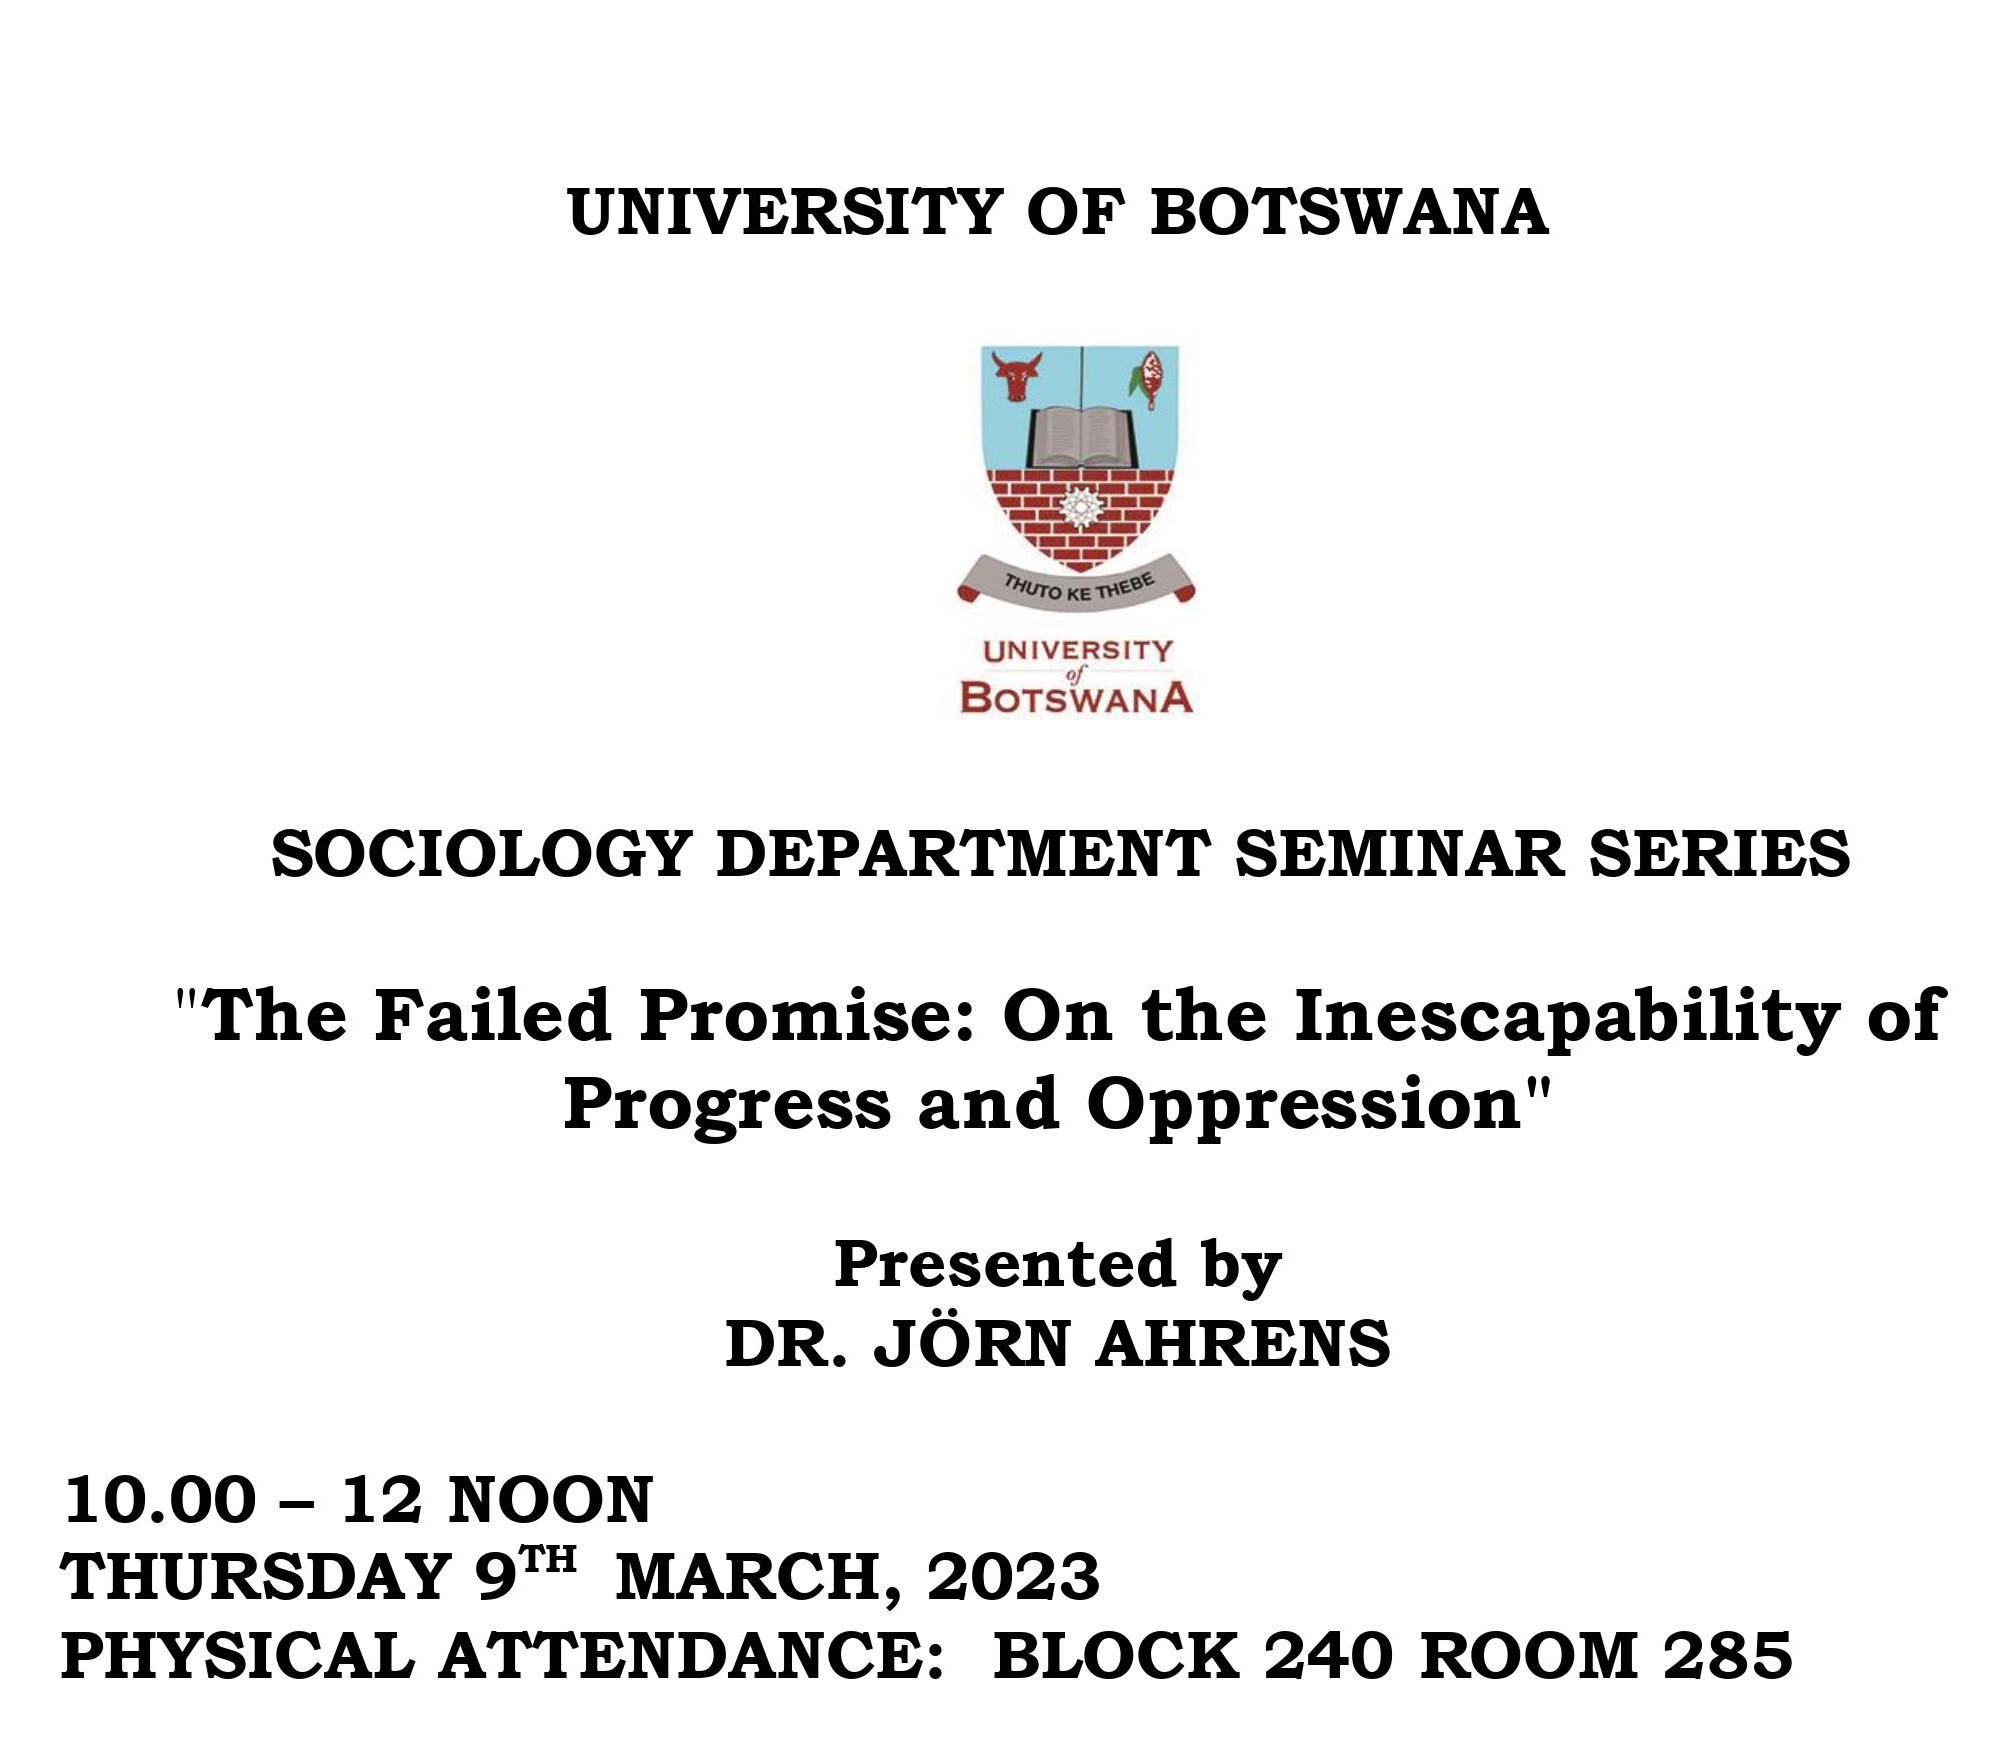 Seminar Series: “The Failed Promise: On the Inescapability of Progress and Oppression”